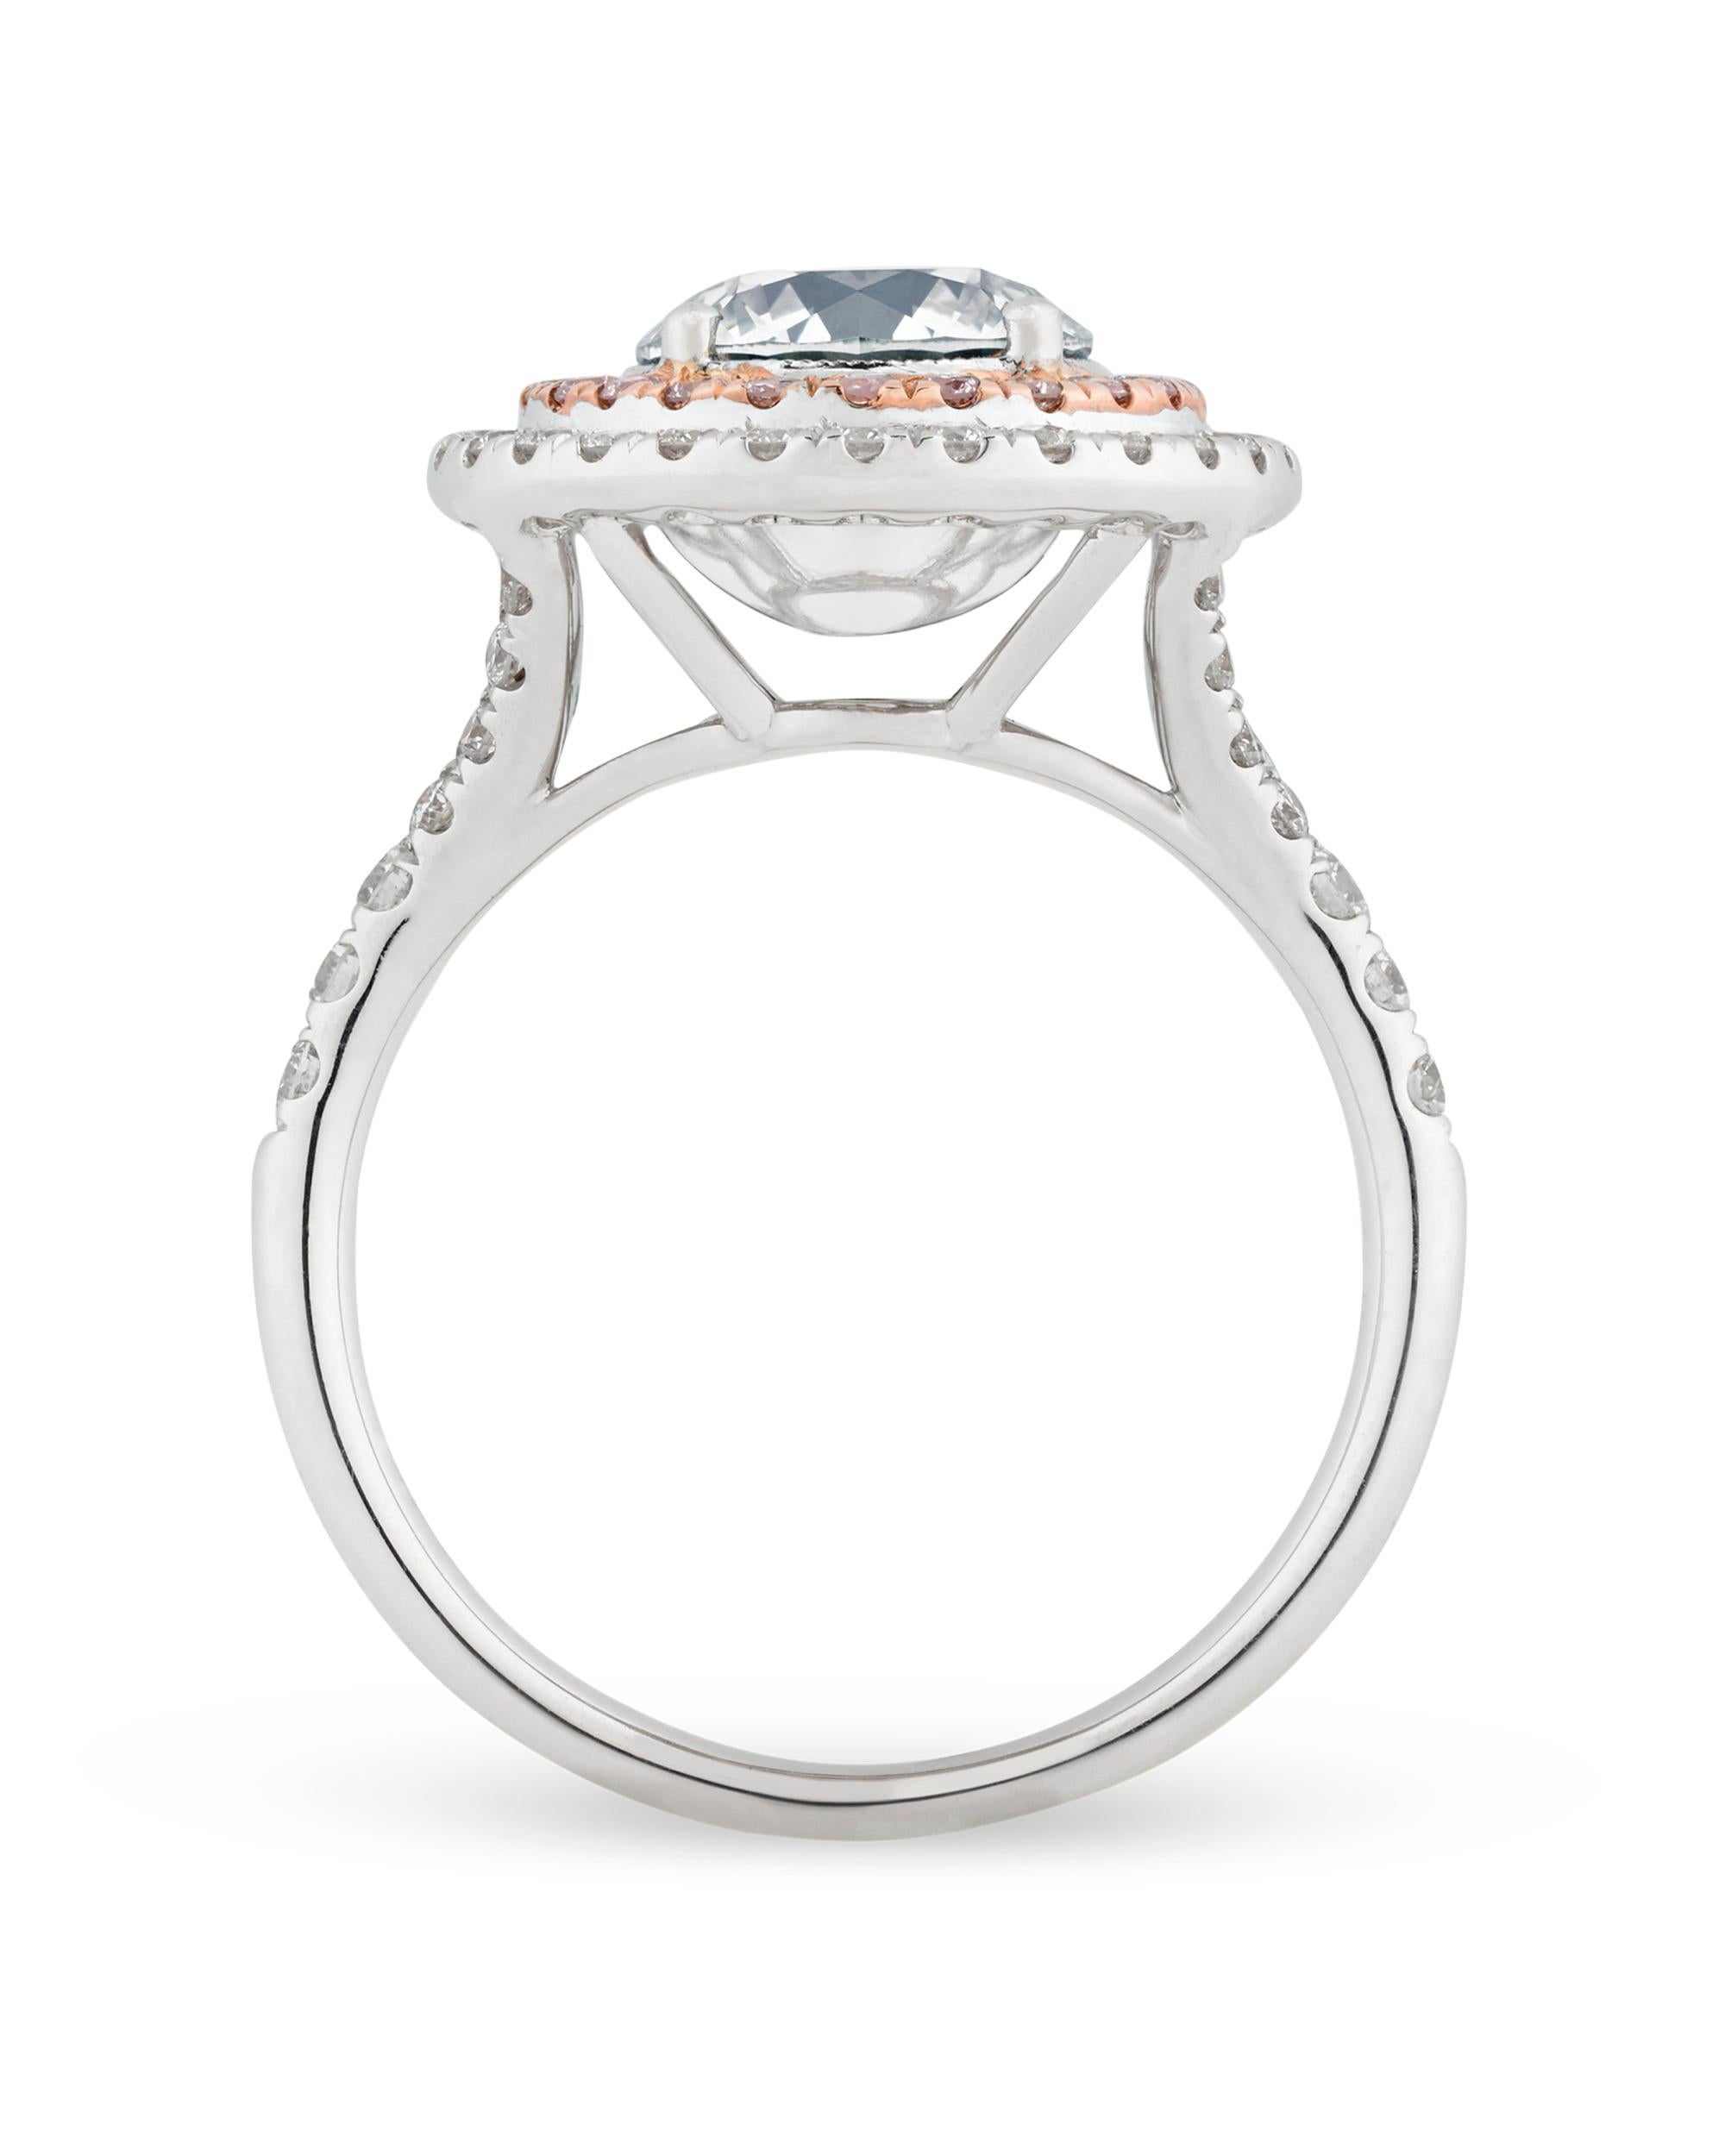 An extraordinary fancy very light grey diamond displays incredible depth in this captivating ring. This rare 1.73-carat gem exhibits a cool, steel grey hue, with a fiery spark that is enhanced by the rosy pink diamonds that surround it. Certified by